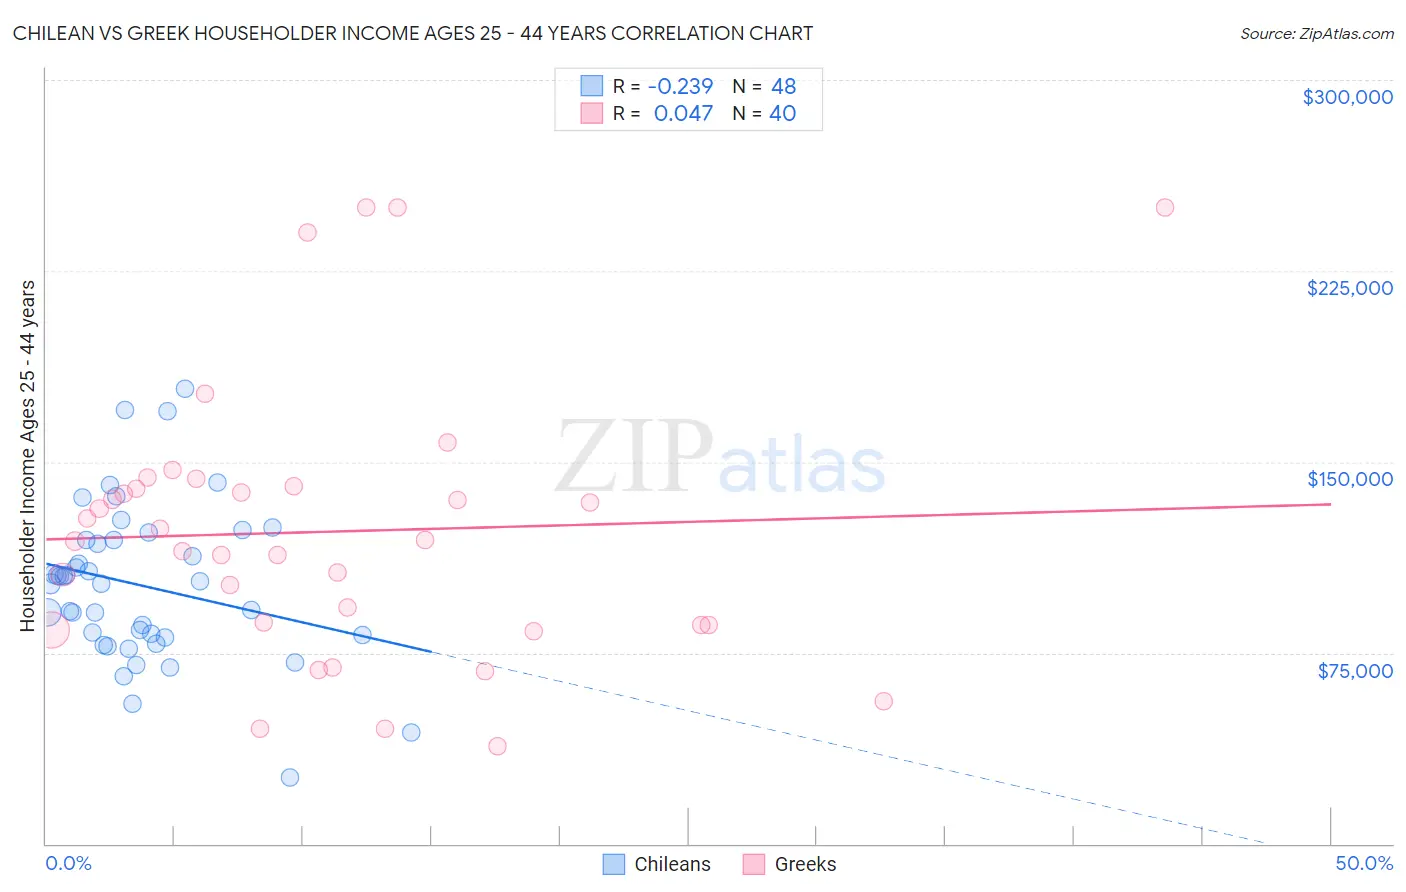 Chilean vs Greek Householder Income Ages 25 - 44 years